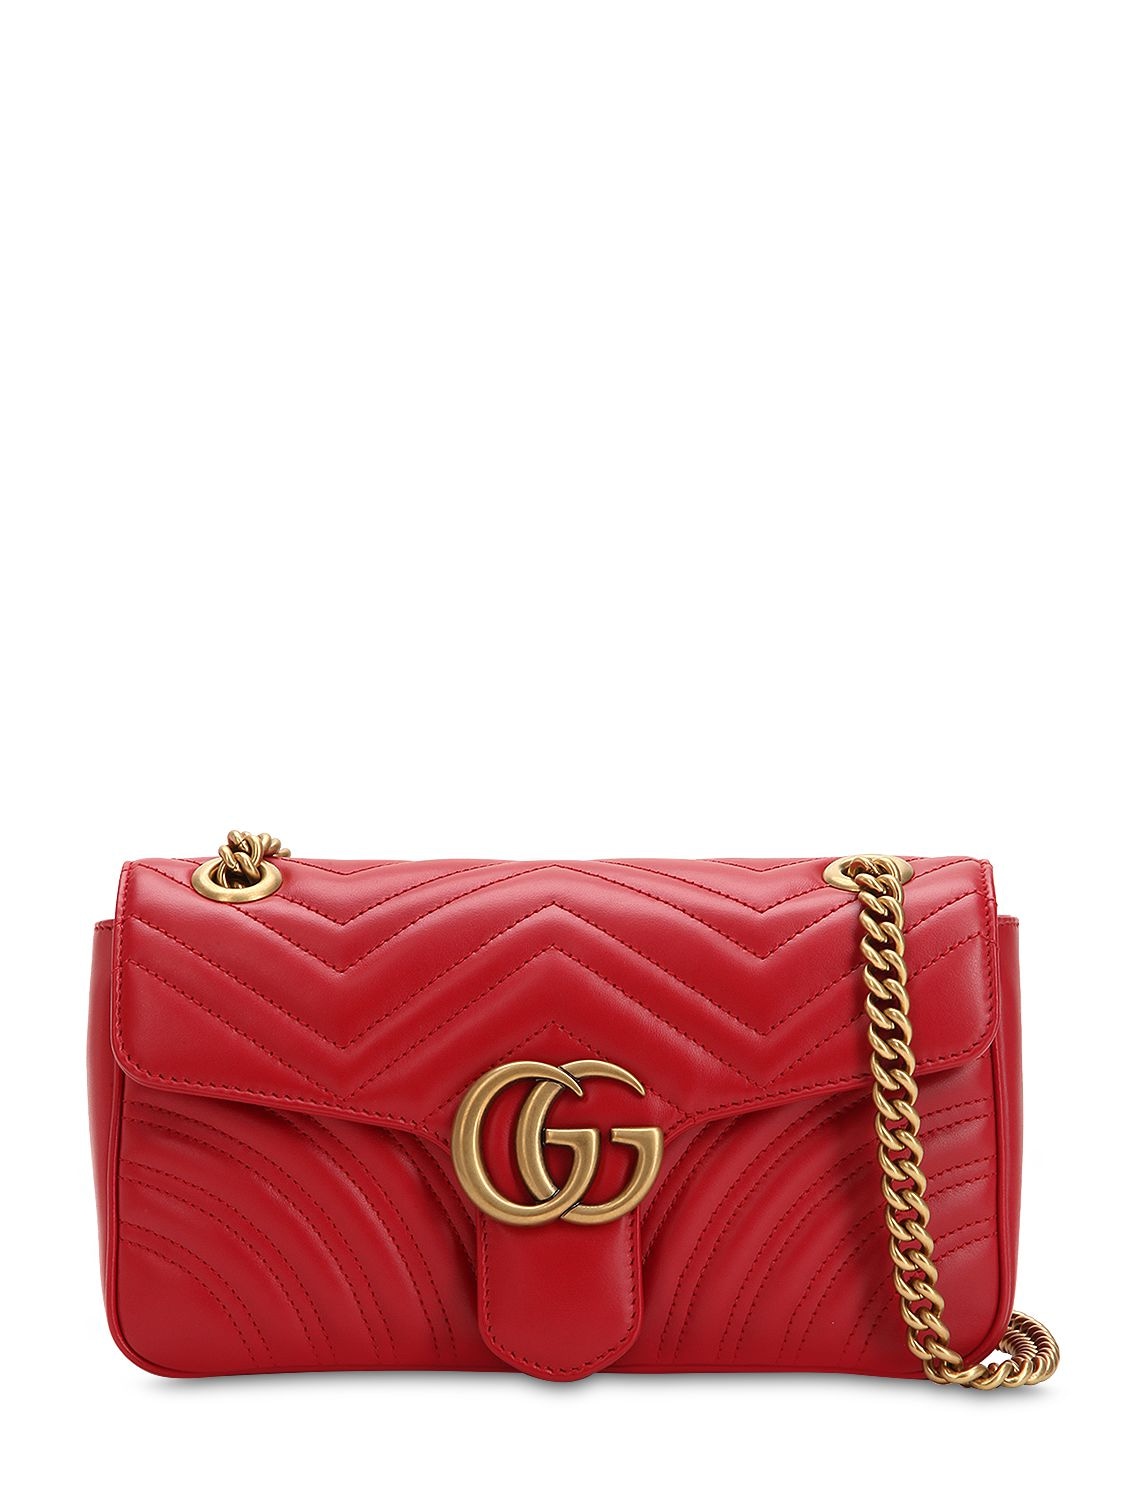 Gucci Gg Marmont 2.0 Mini Shoulder Flap Bag In Lion Trap. Ang Chev ...